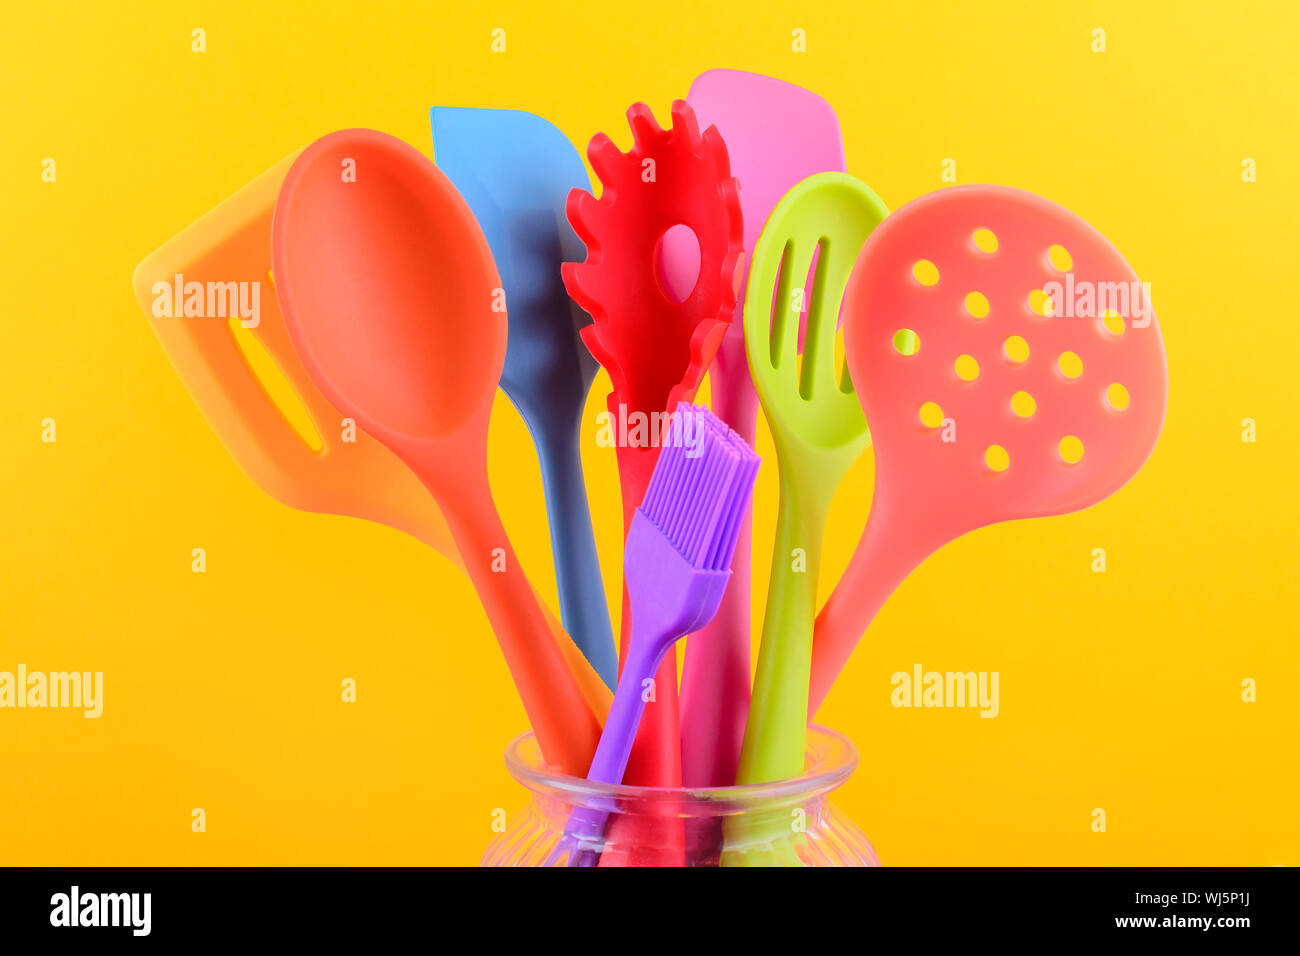 bright multi colored kitchen utensils on yellow background Stock Photo